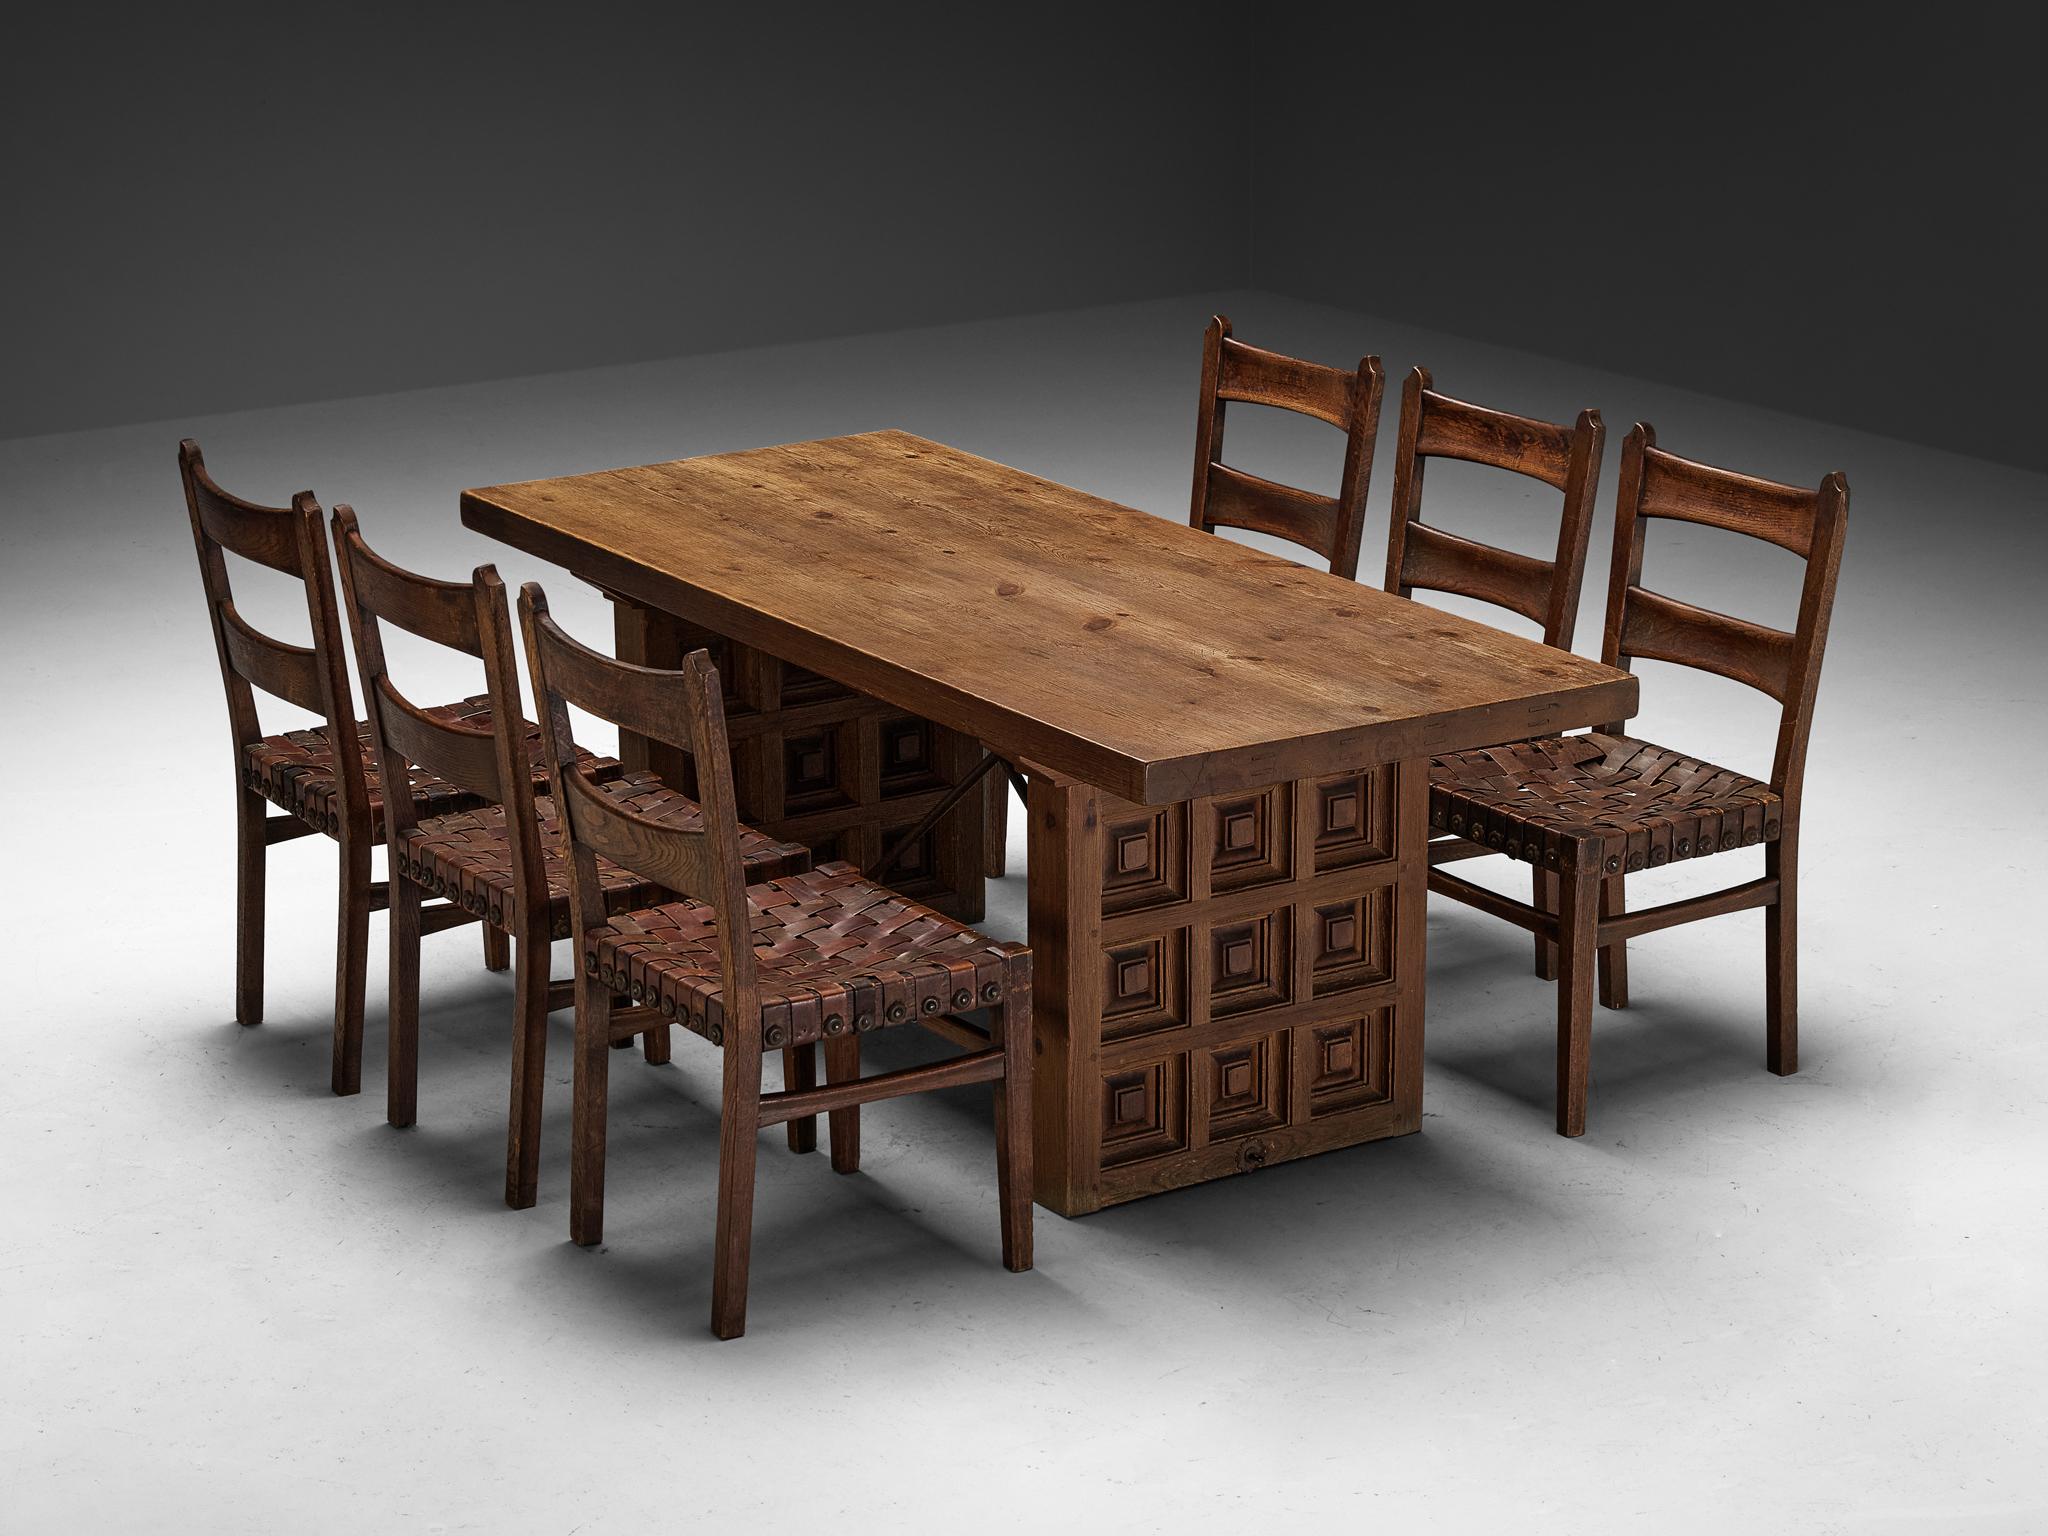 Dining room set consisting of a set of six dining chairs by Ernesto Valabrega paired with a dining table by Biosca


Ernesto Valabrega, set of six dining chairs, oak, leather, iron, Italy, 1930s

These well-sculpted chairs are designed by Italian